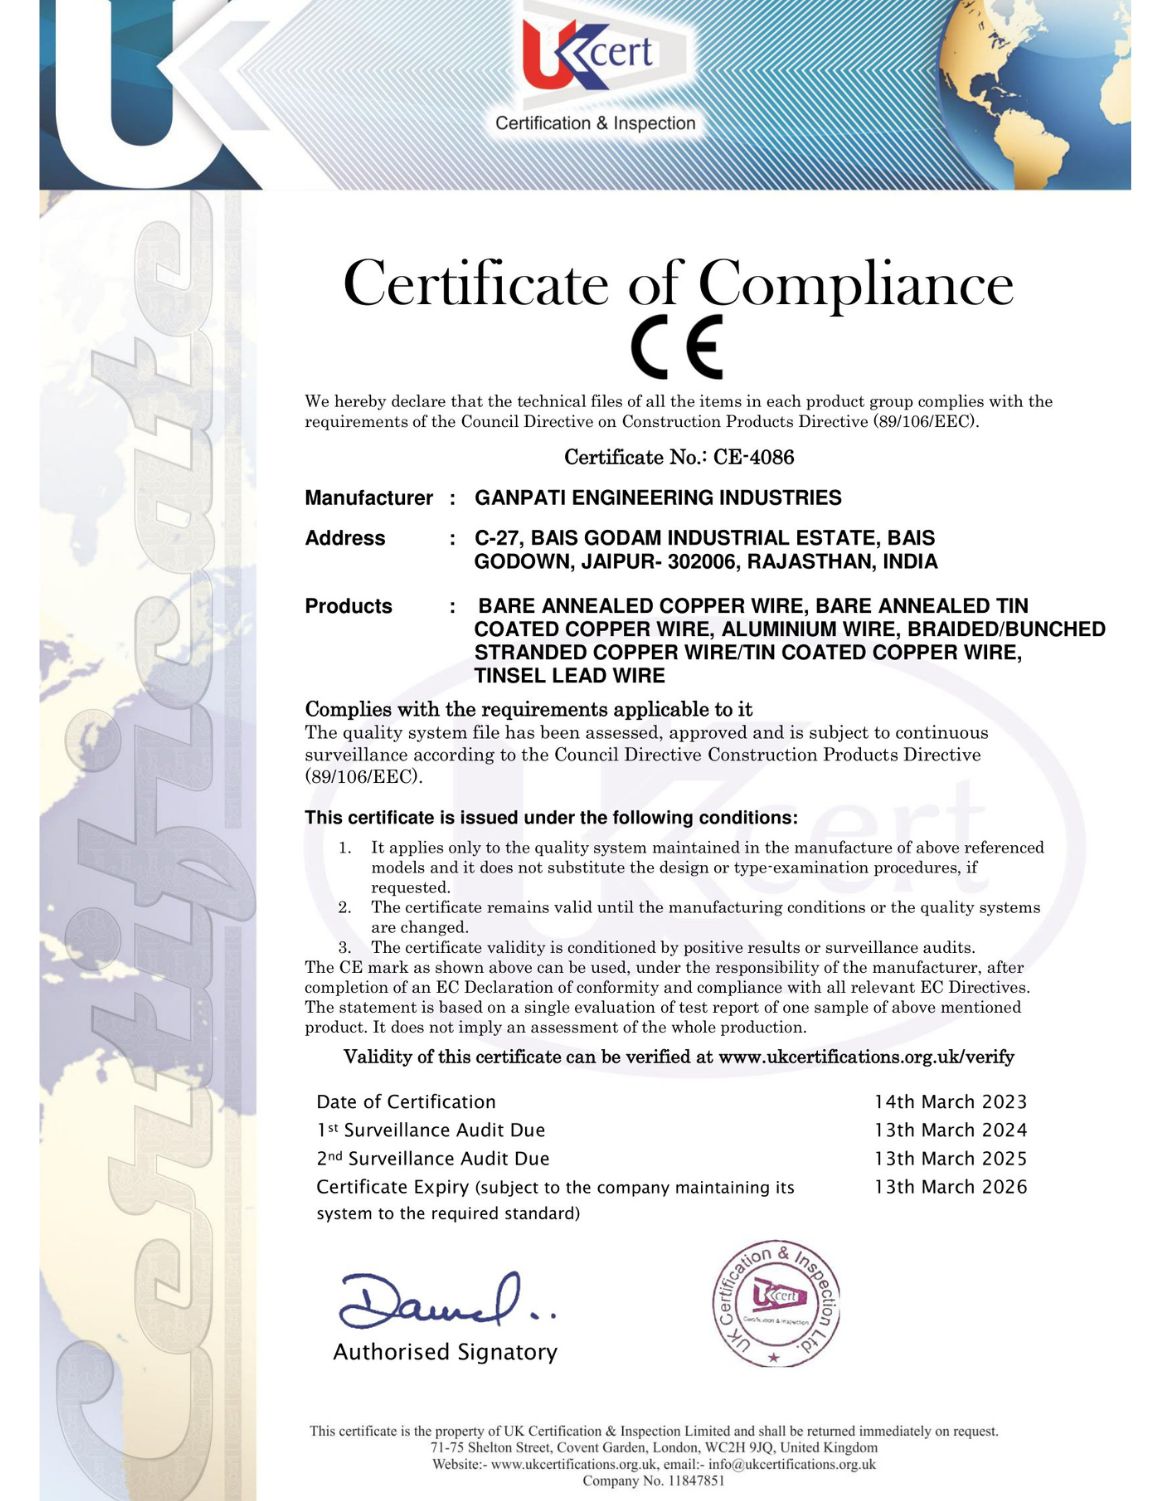 Certificate-of-Compliance-4086